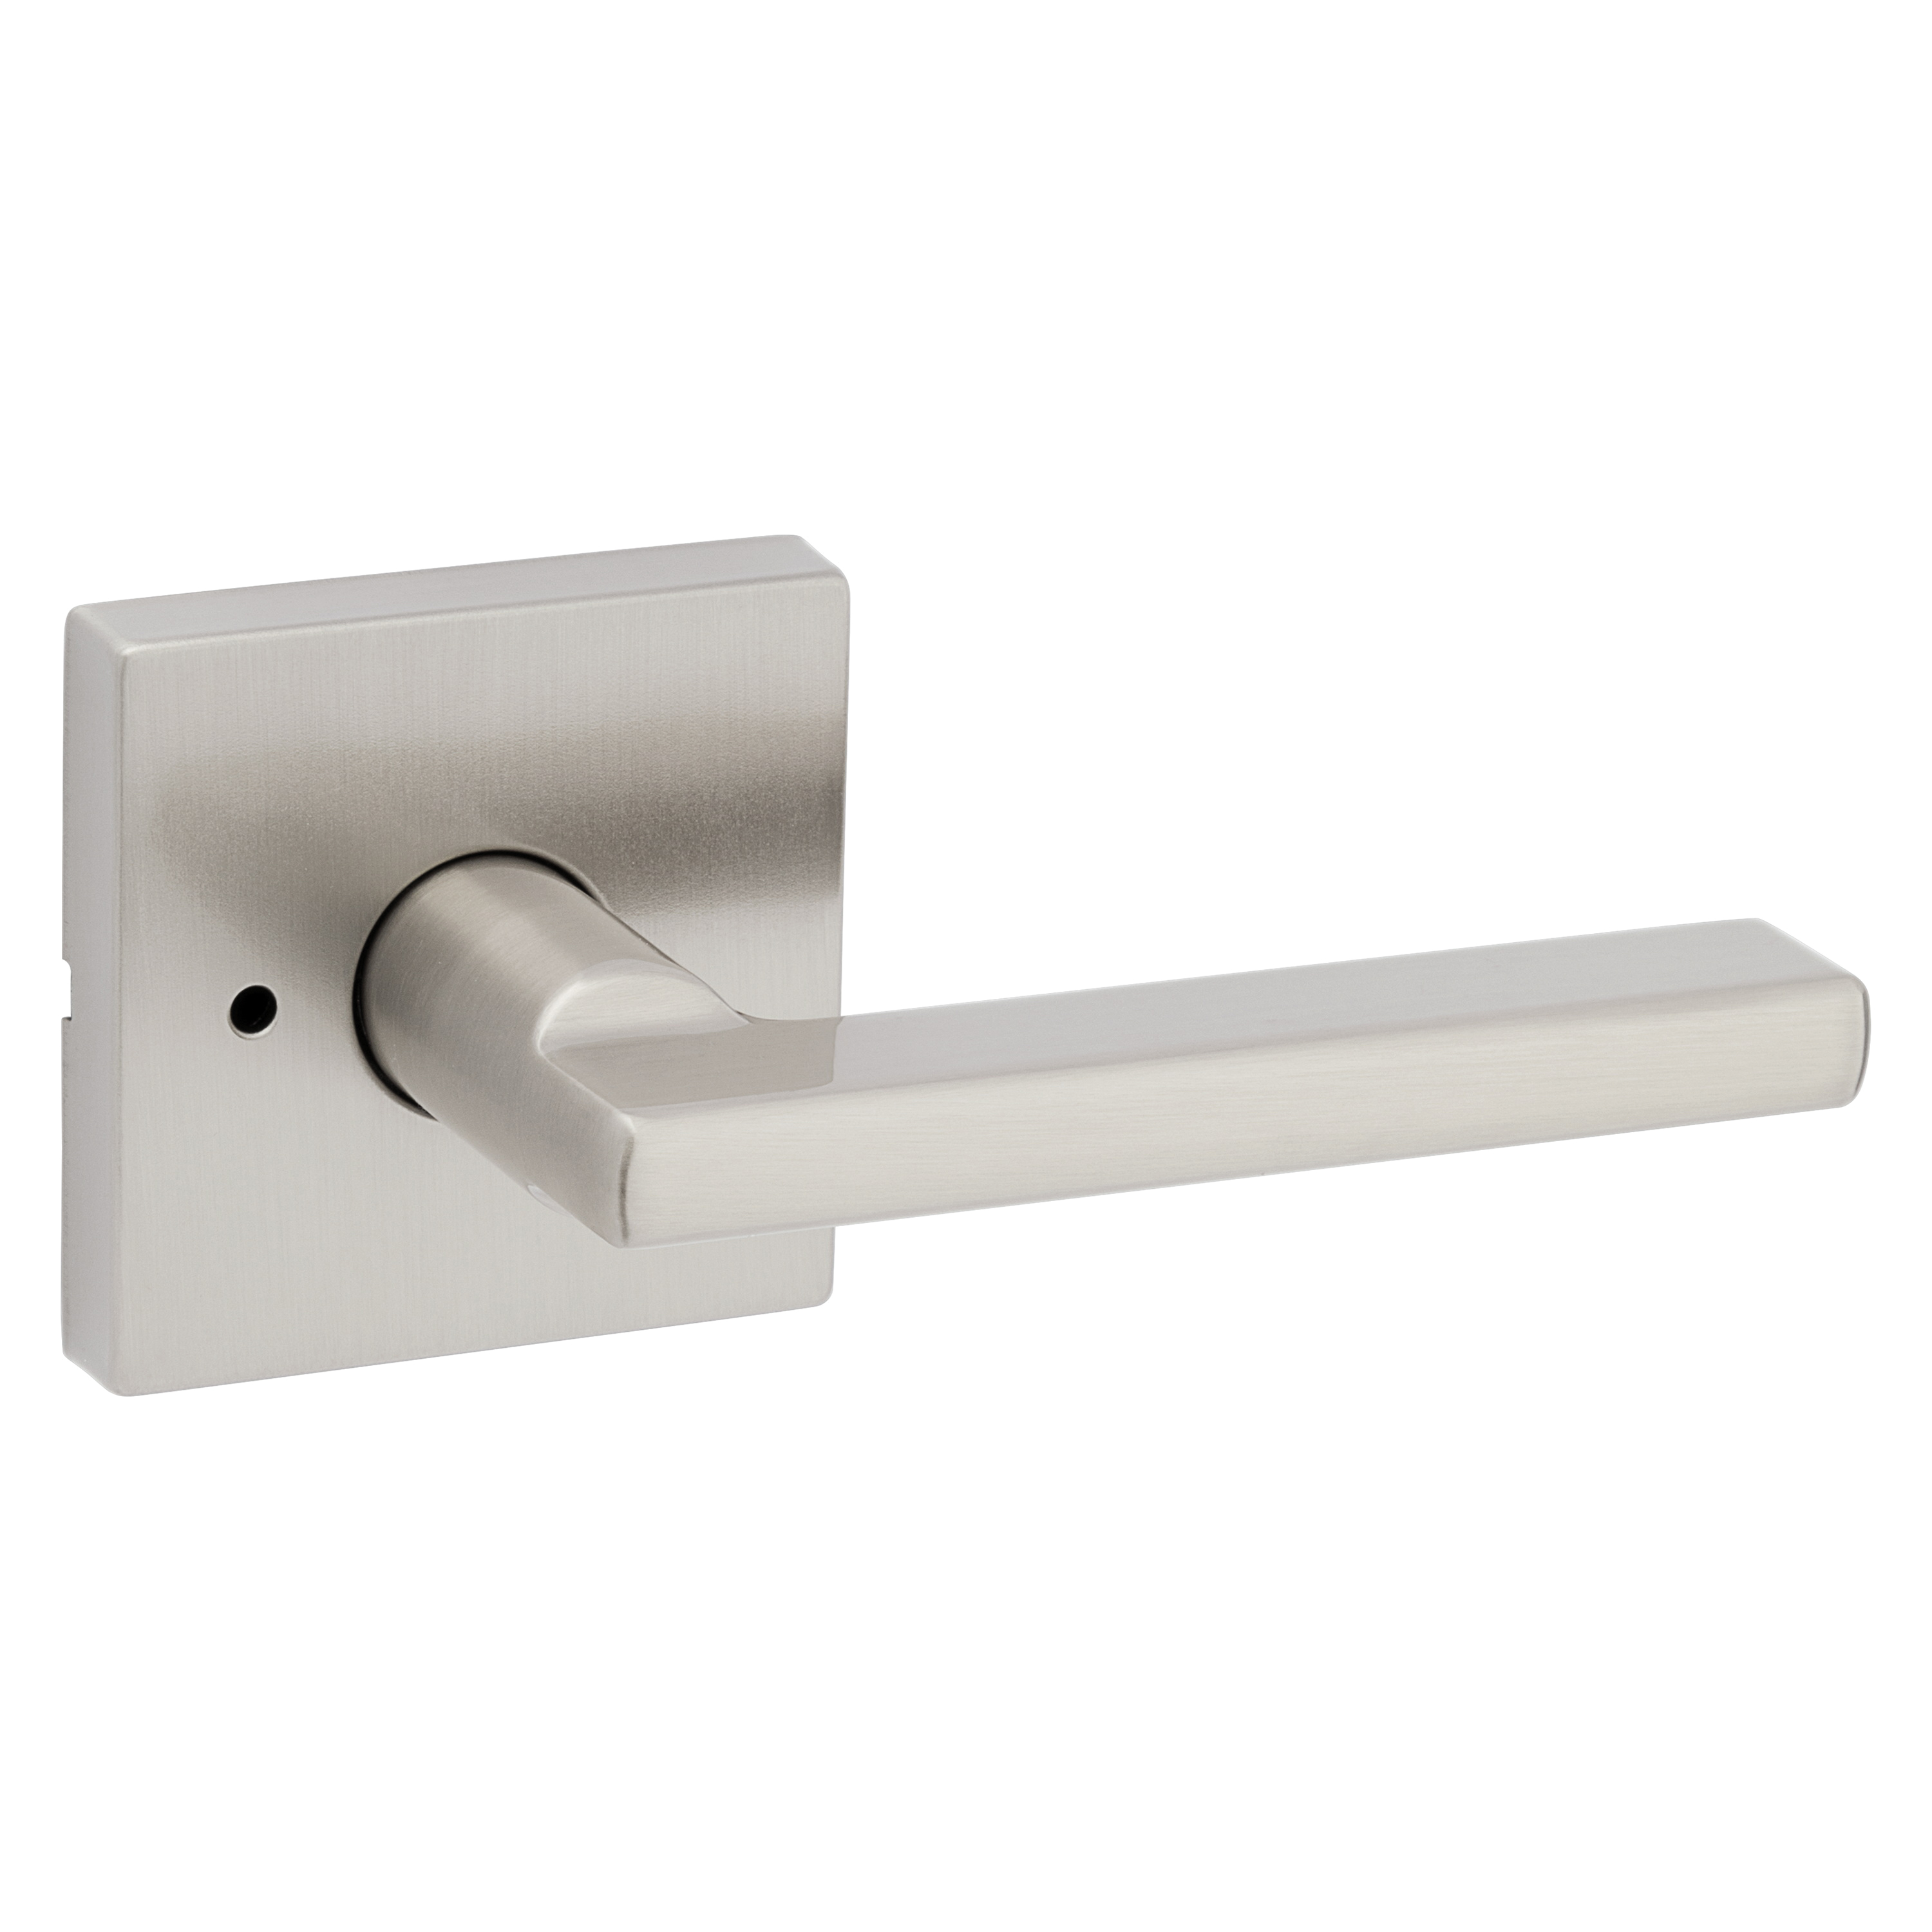 Kwikset Signature Series 155HFL SQT 15 Privacy Lever, Pushbutton Lock, Satin Nickel, Zinc, Residential, Reversible Hand